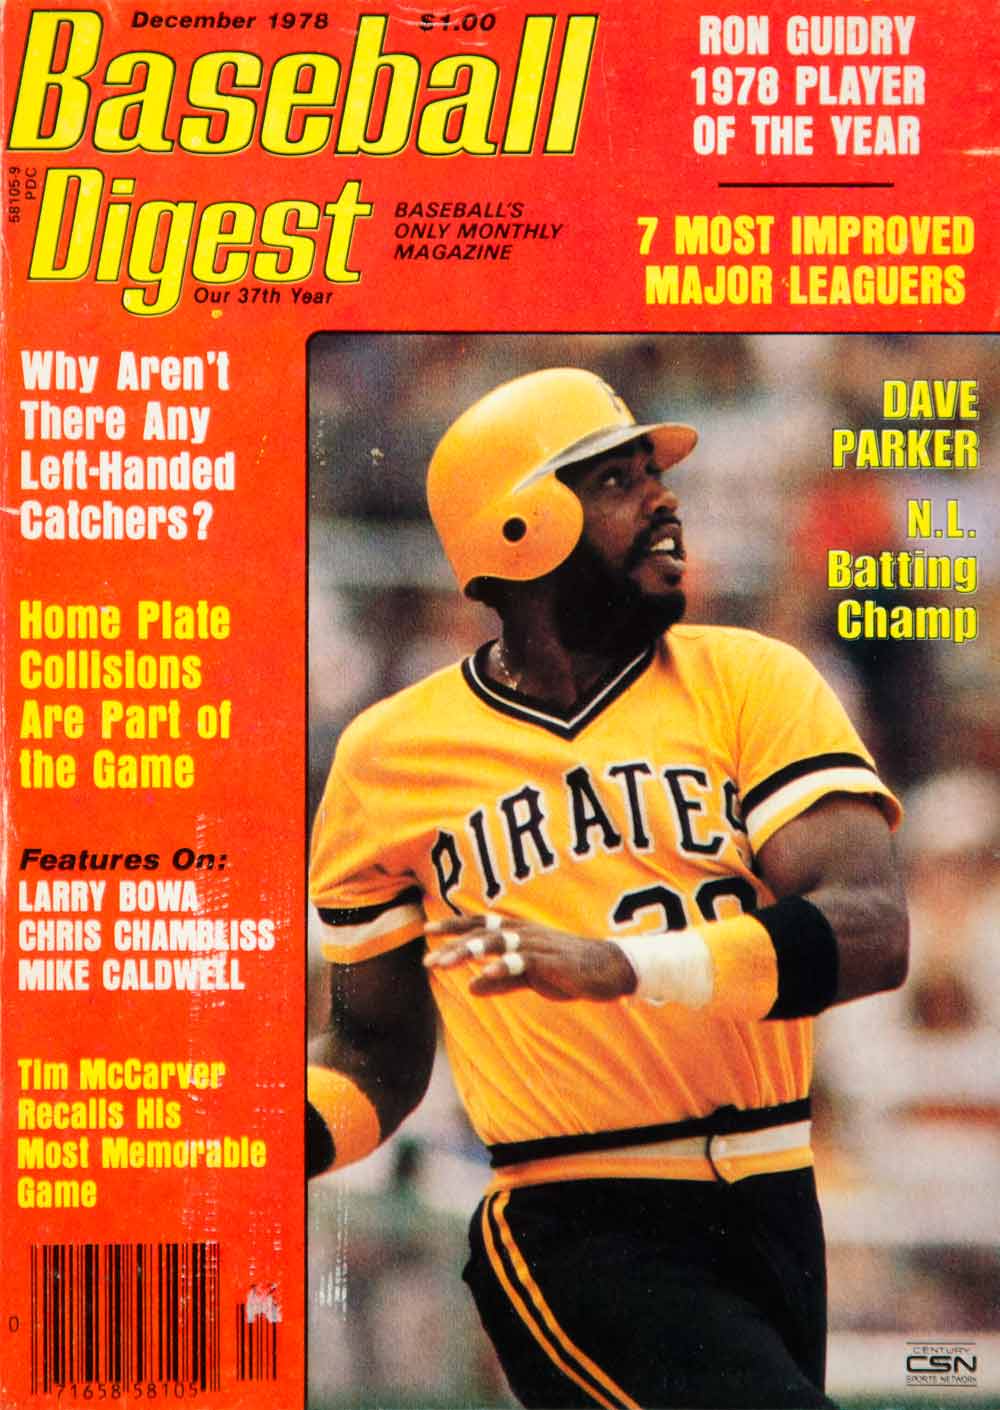 Dave Parker and Pirates fans = not a great marriage! #baseballcards #